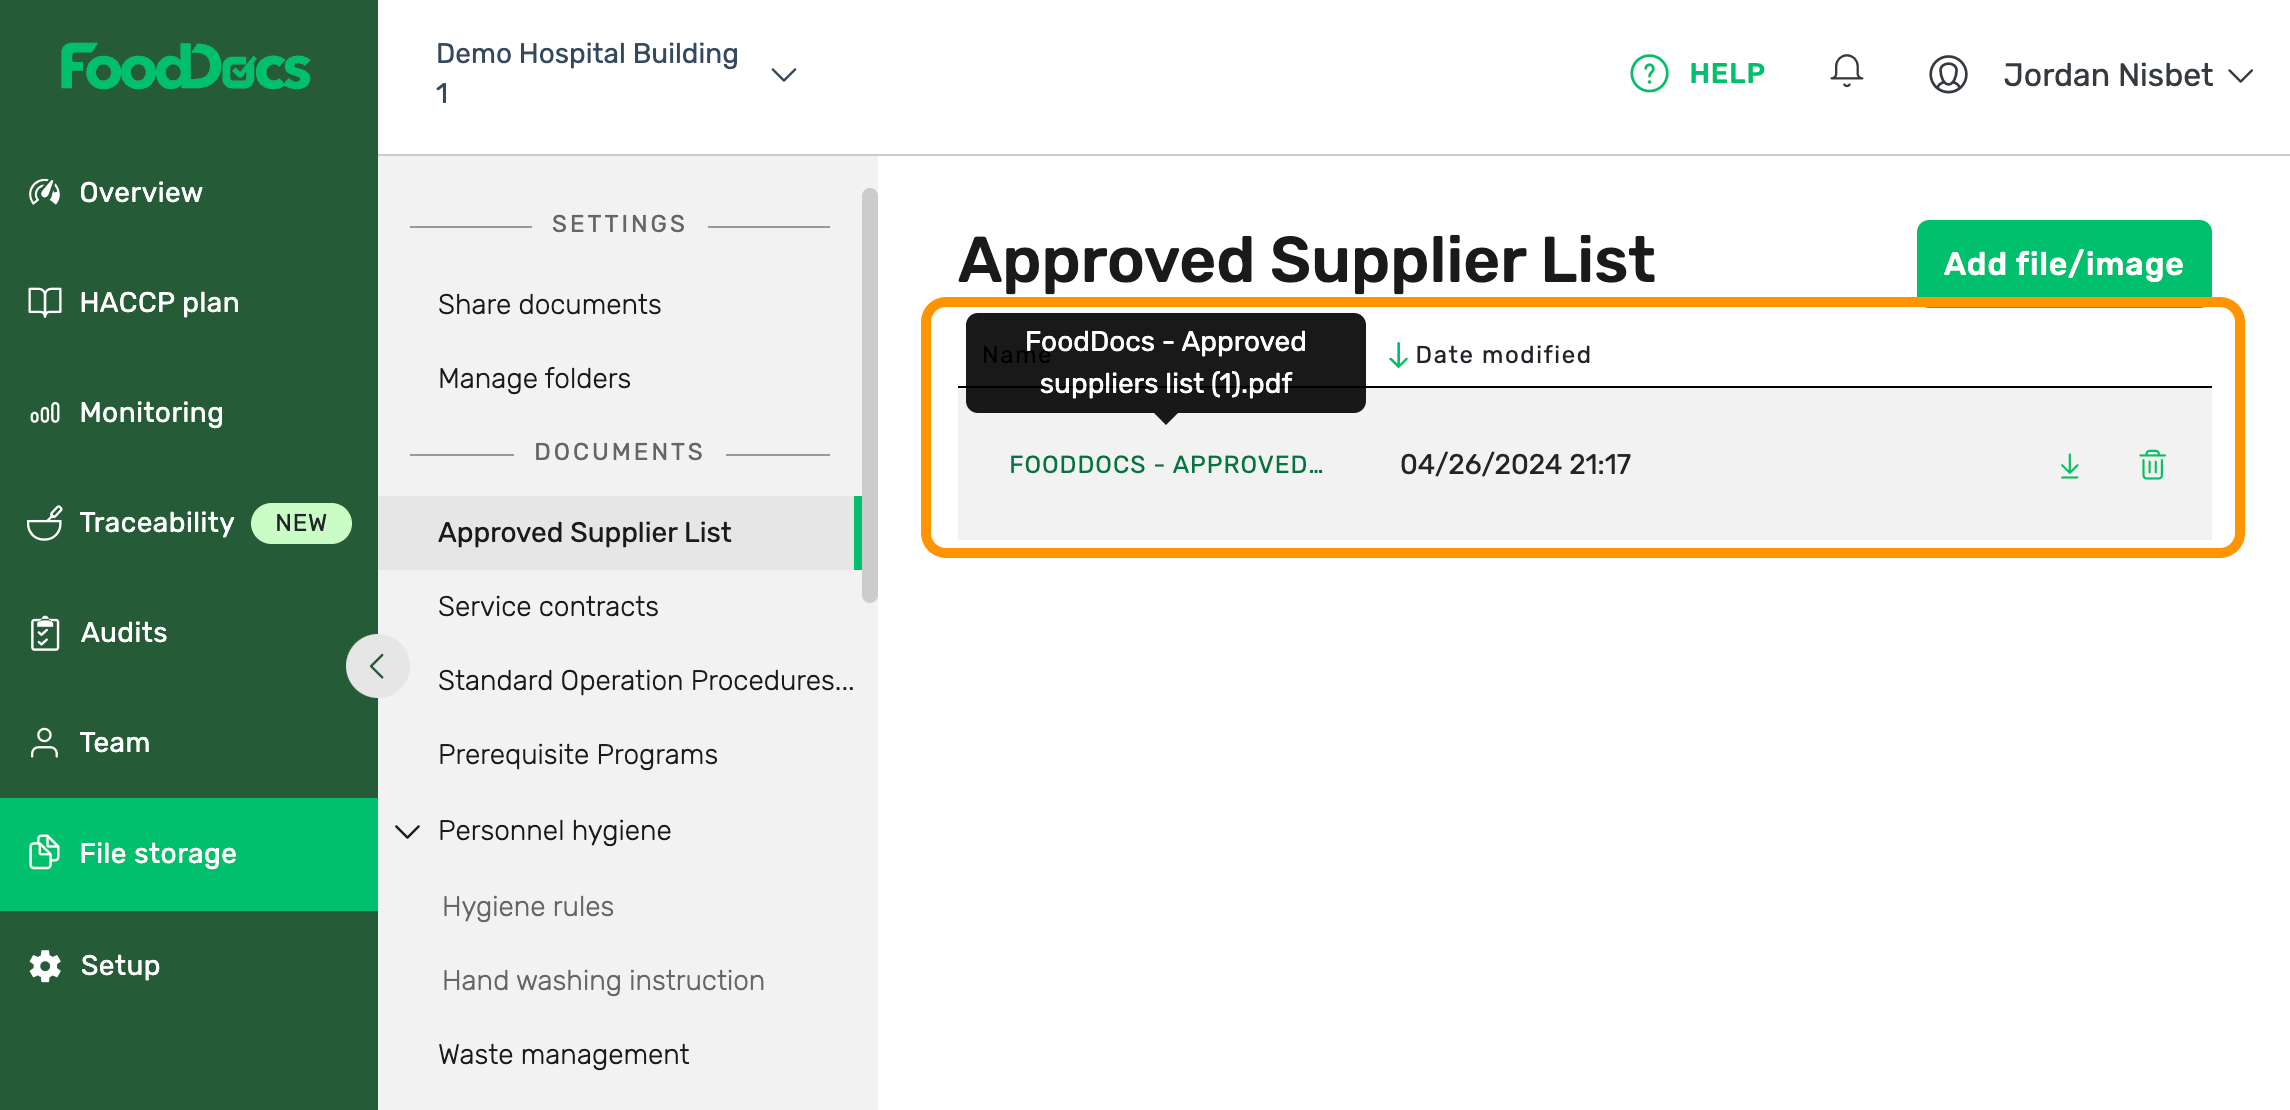 Example of FoodDocs File Storage feature where you can upload and safely store your approved supplier list.